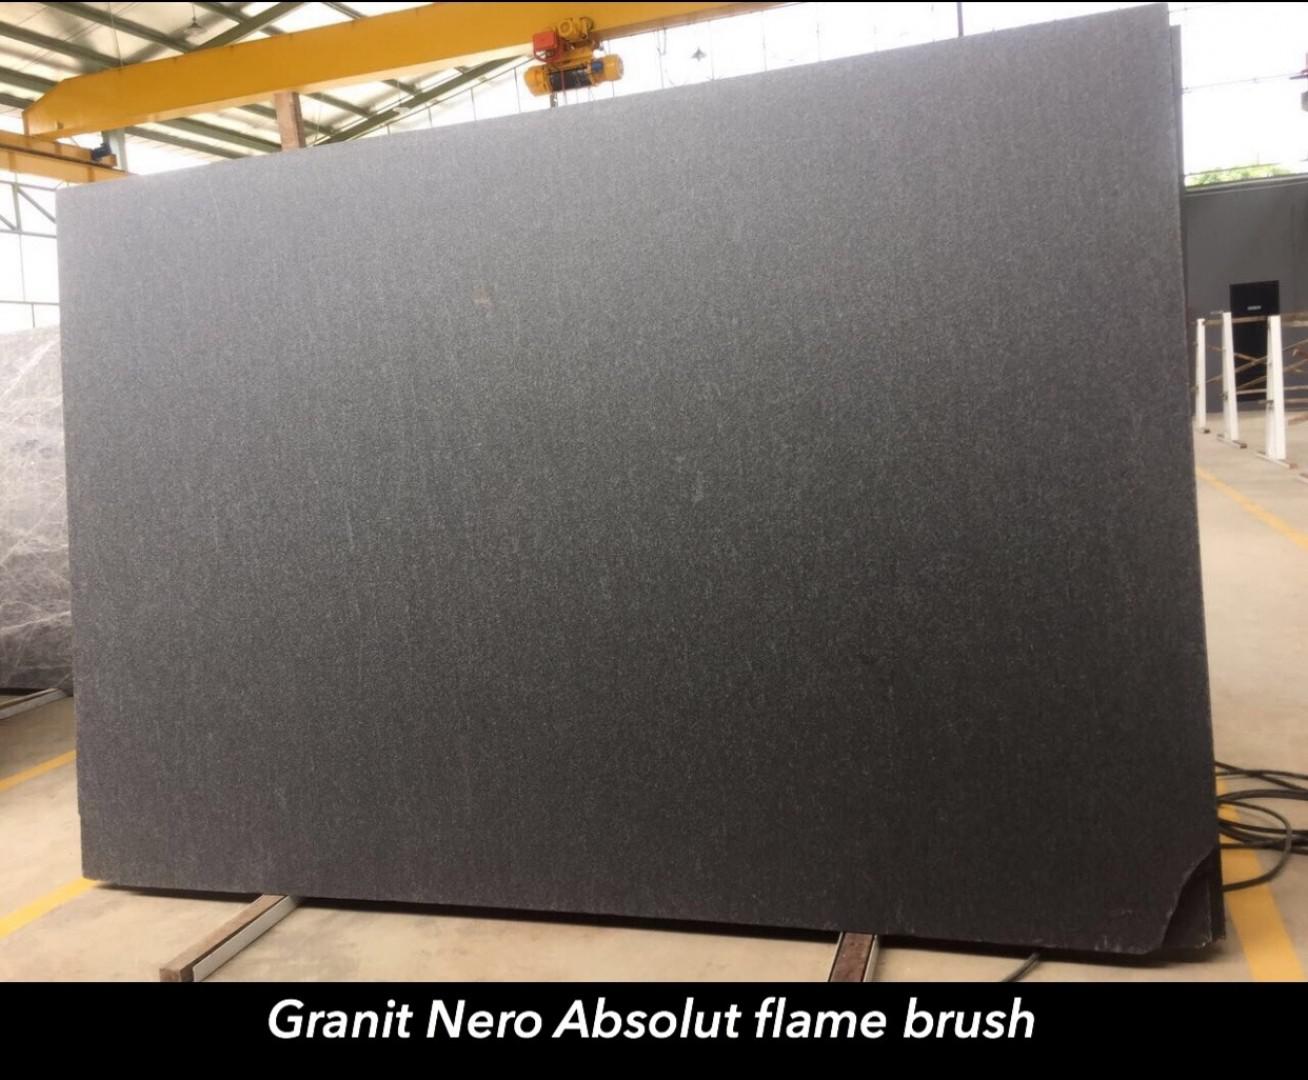 Granit Nero Absolute Flame Brush from JSP